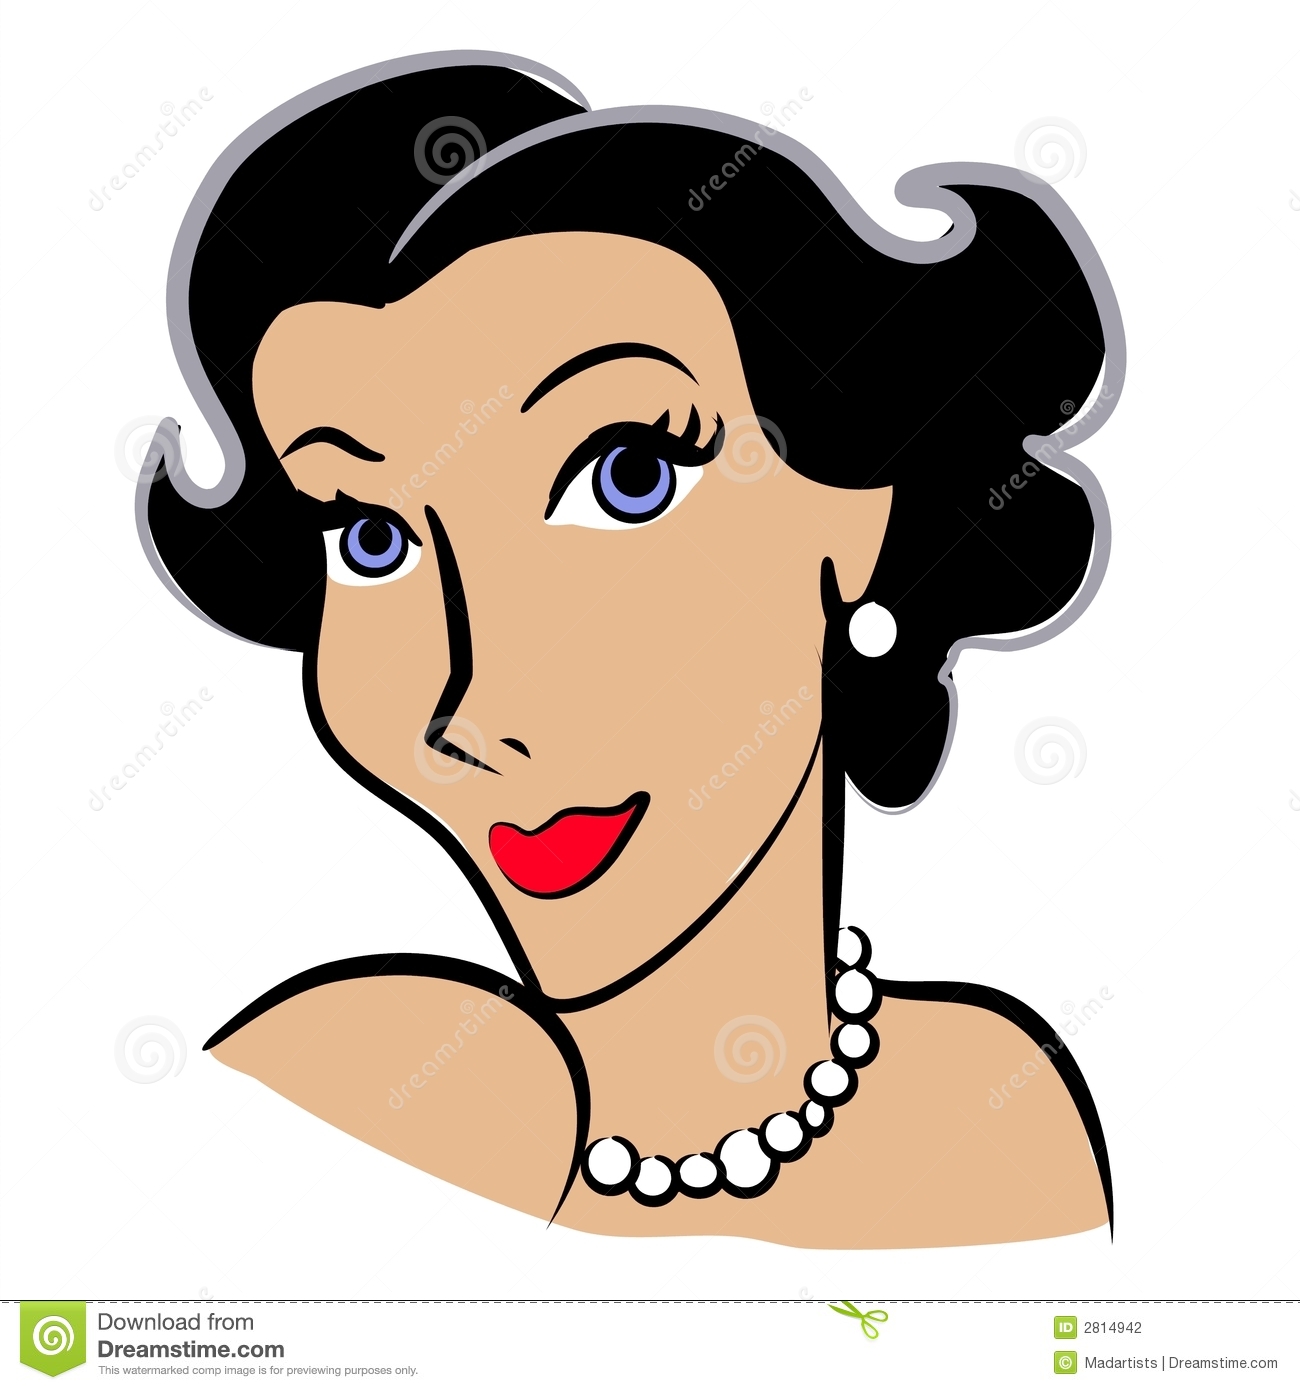 Clip Art Illustration Of The Head Of A Woman With Dark Hair Blue